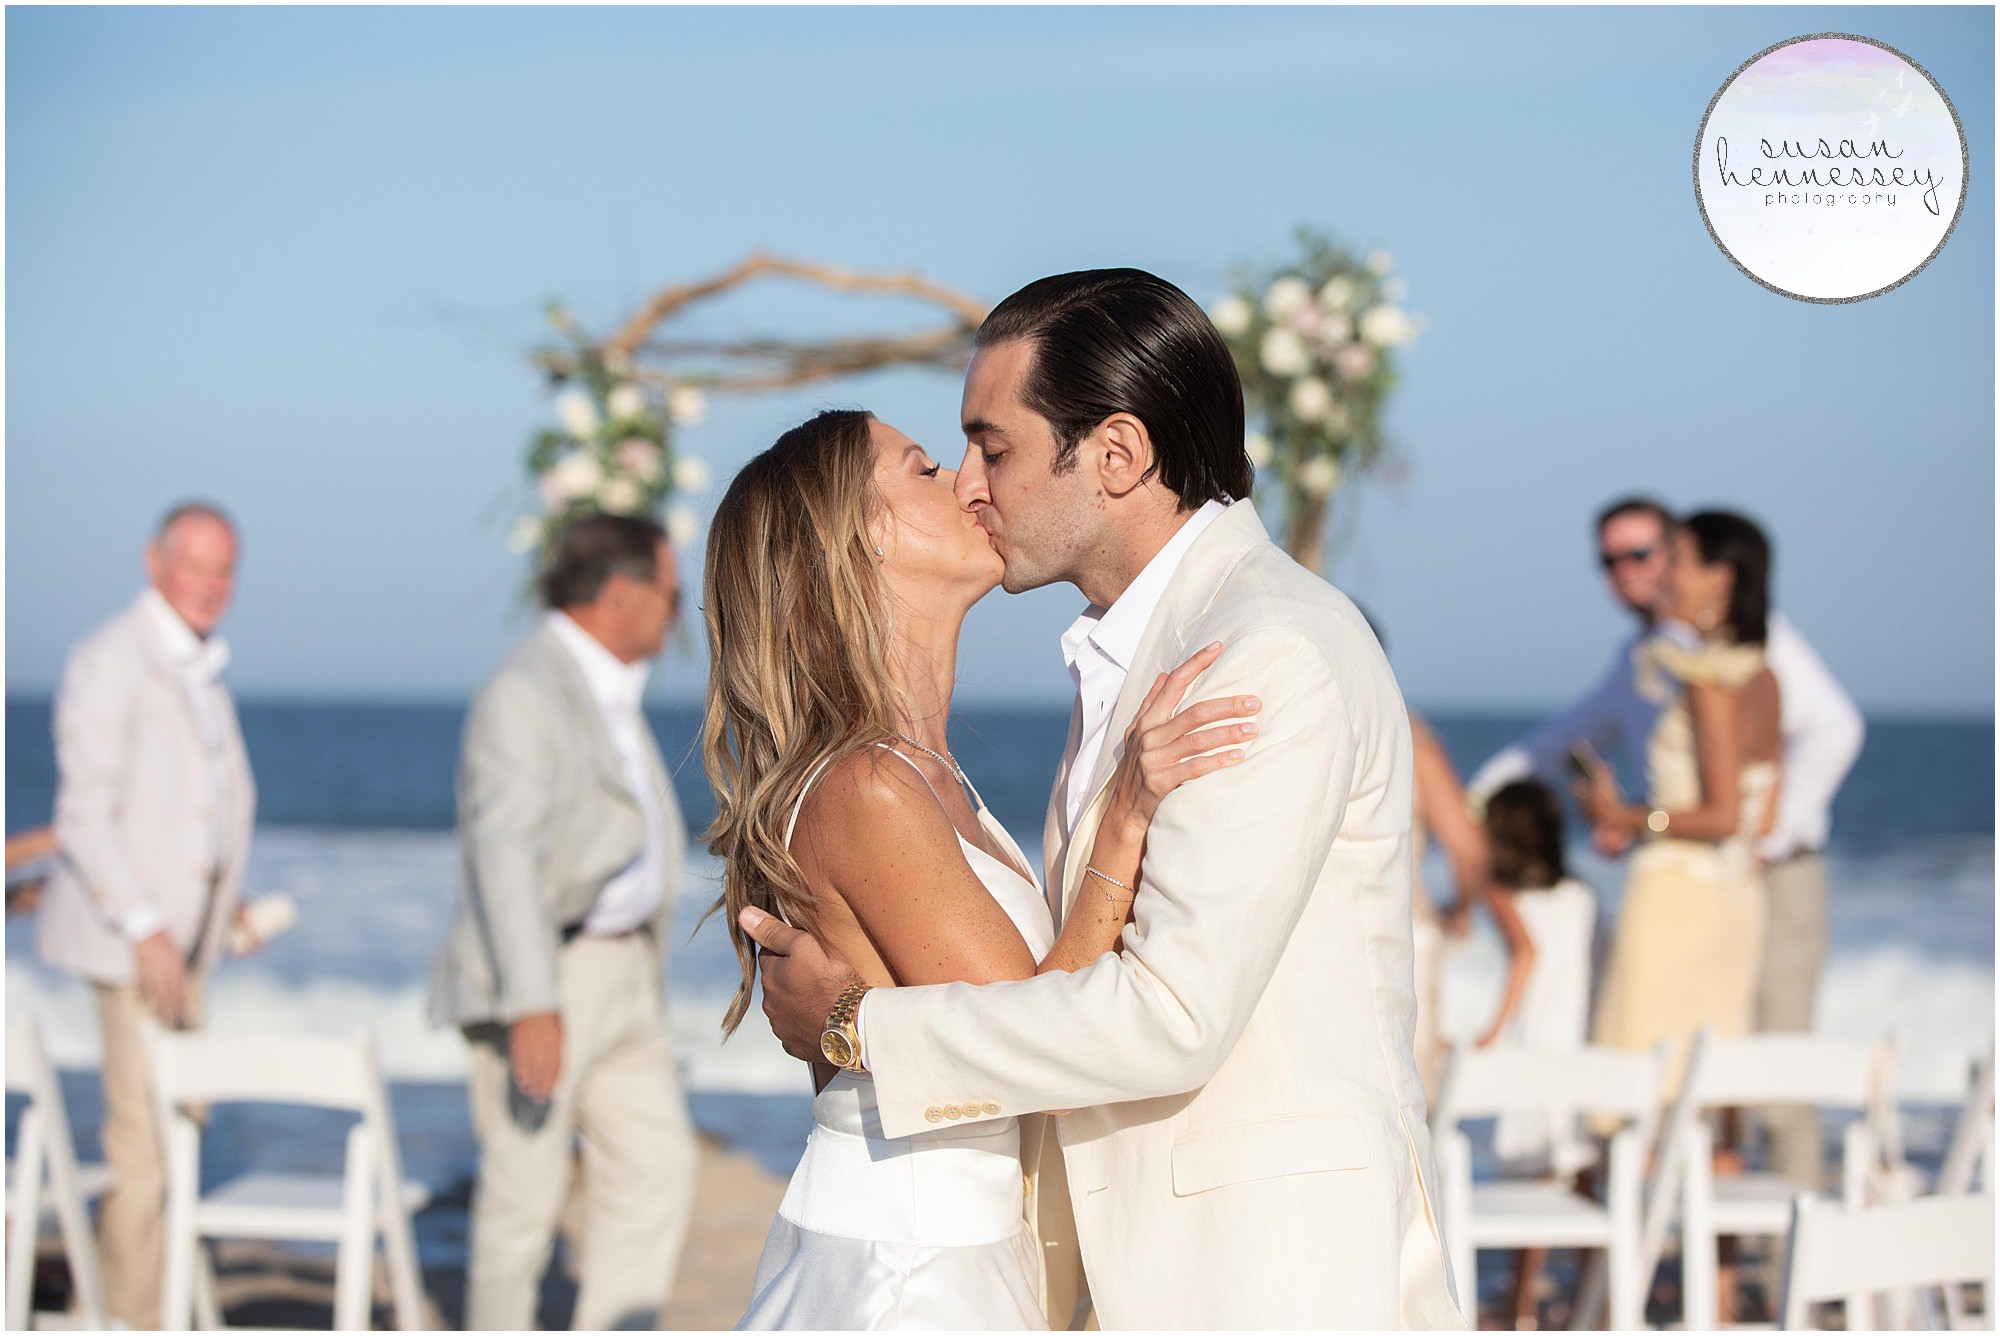 Intimate beach ceremony at South jersey microwedding